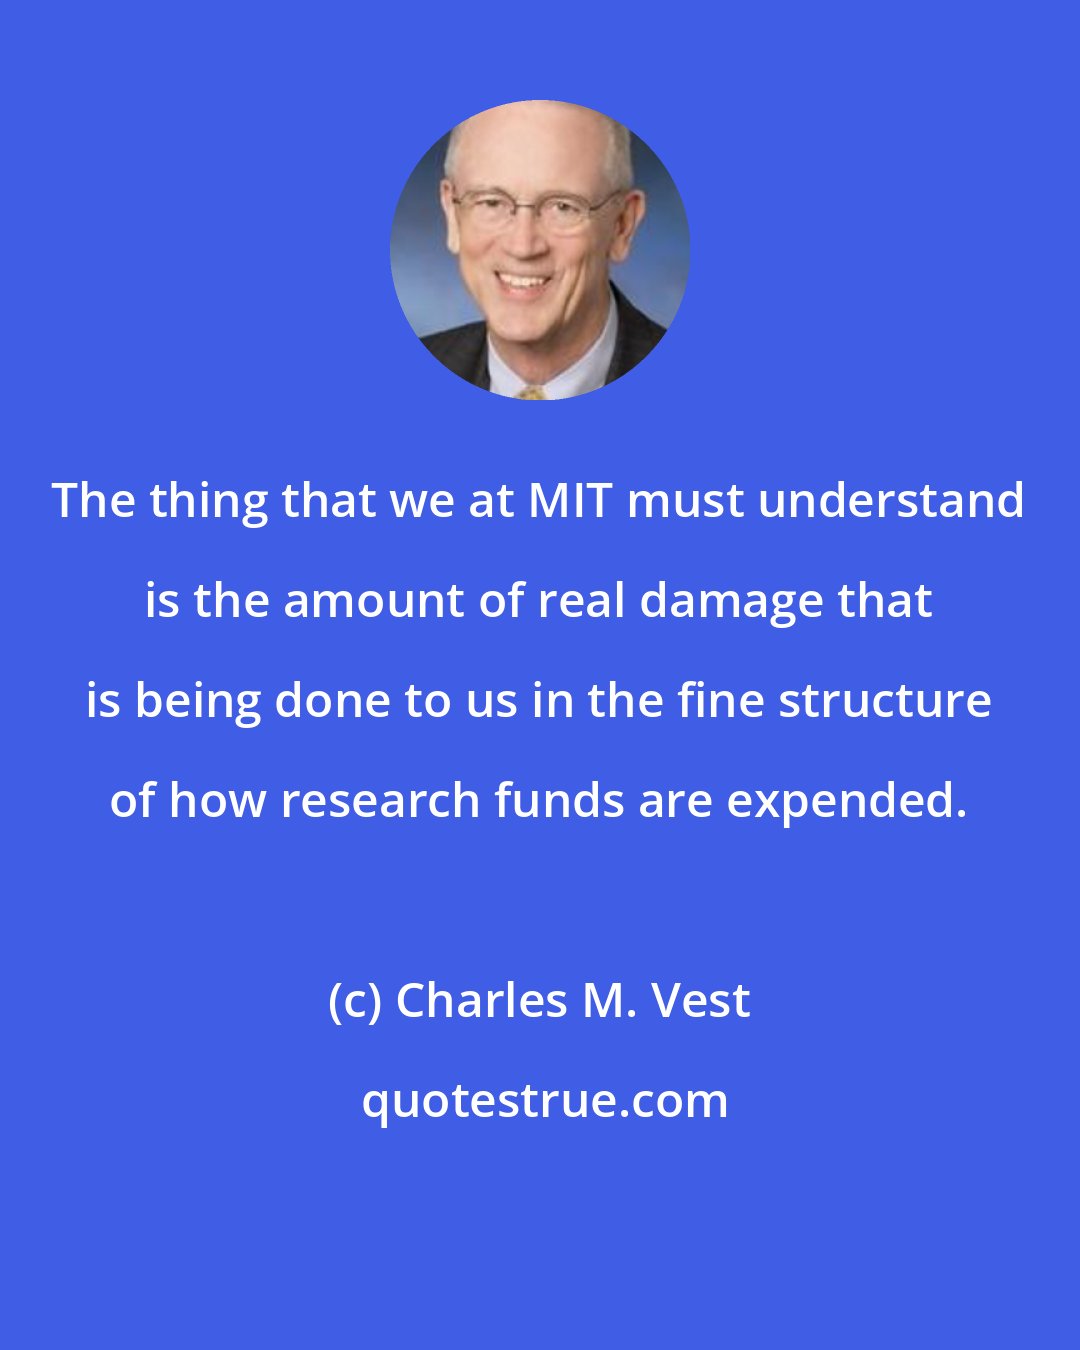 Charles M. Vest: The thing that we at MIT must understand is the amount of real damage that is being done to us in the fine structure of how research funds are expended.